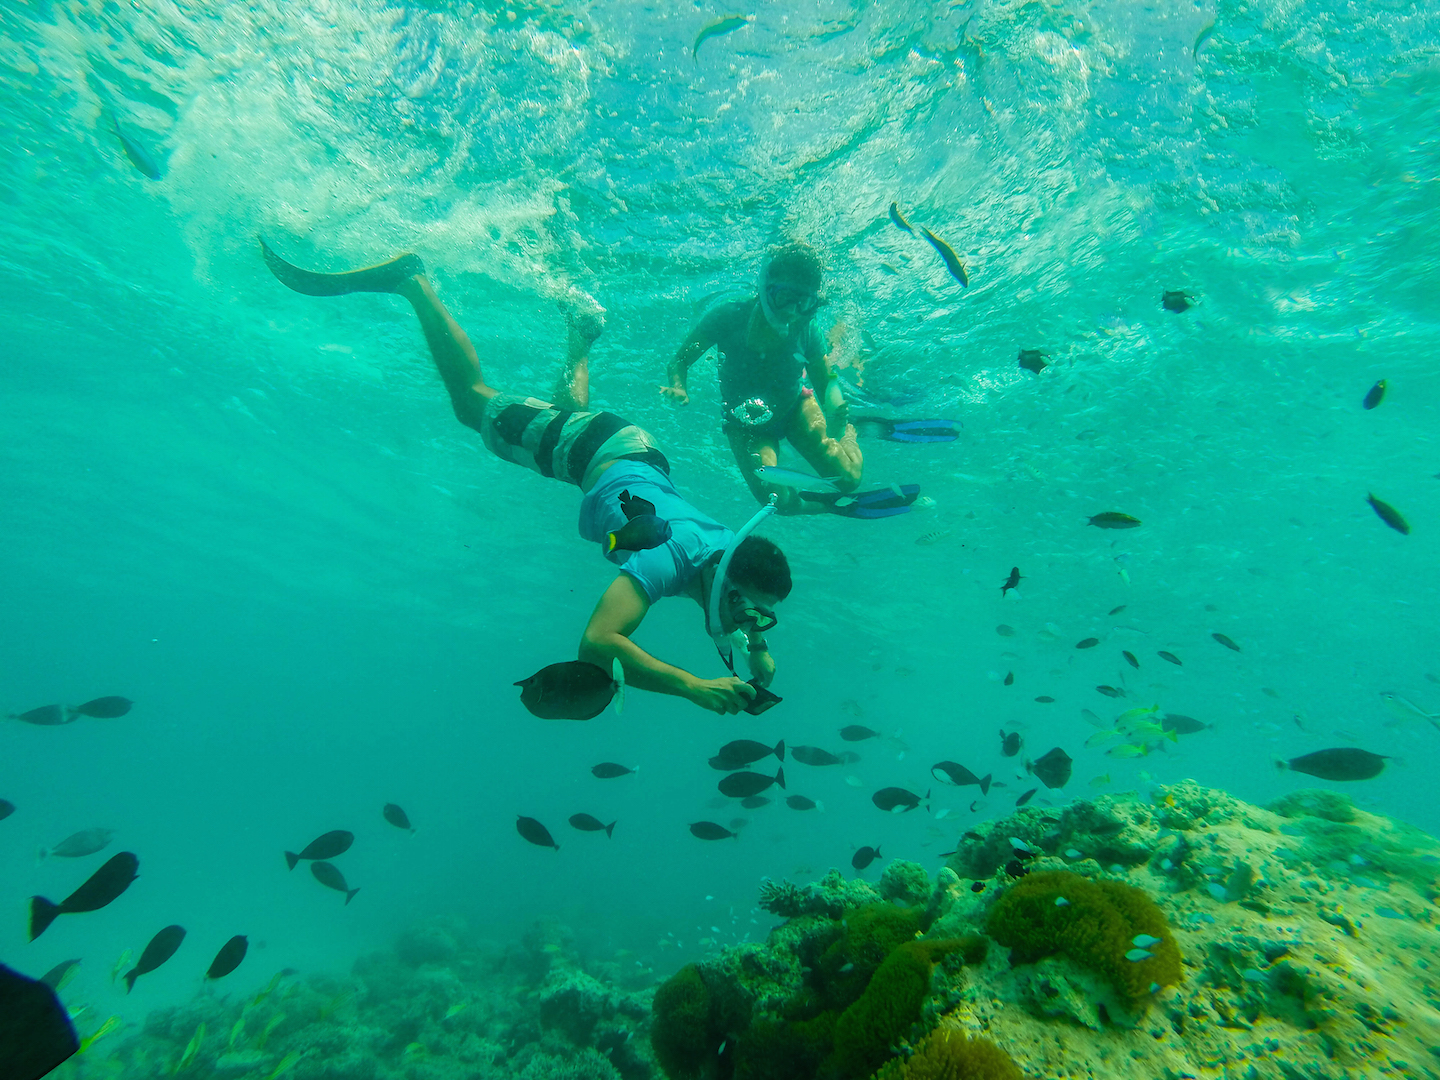 Carlos taking pictures of the soft corals and clown fish, Maldives